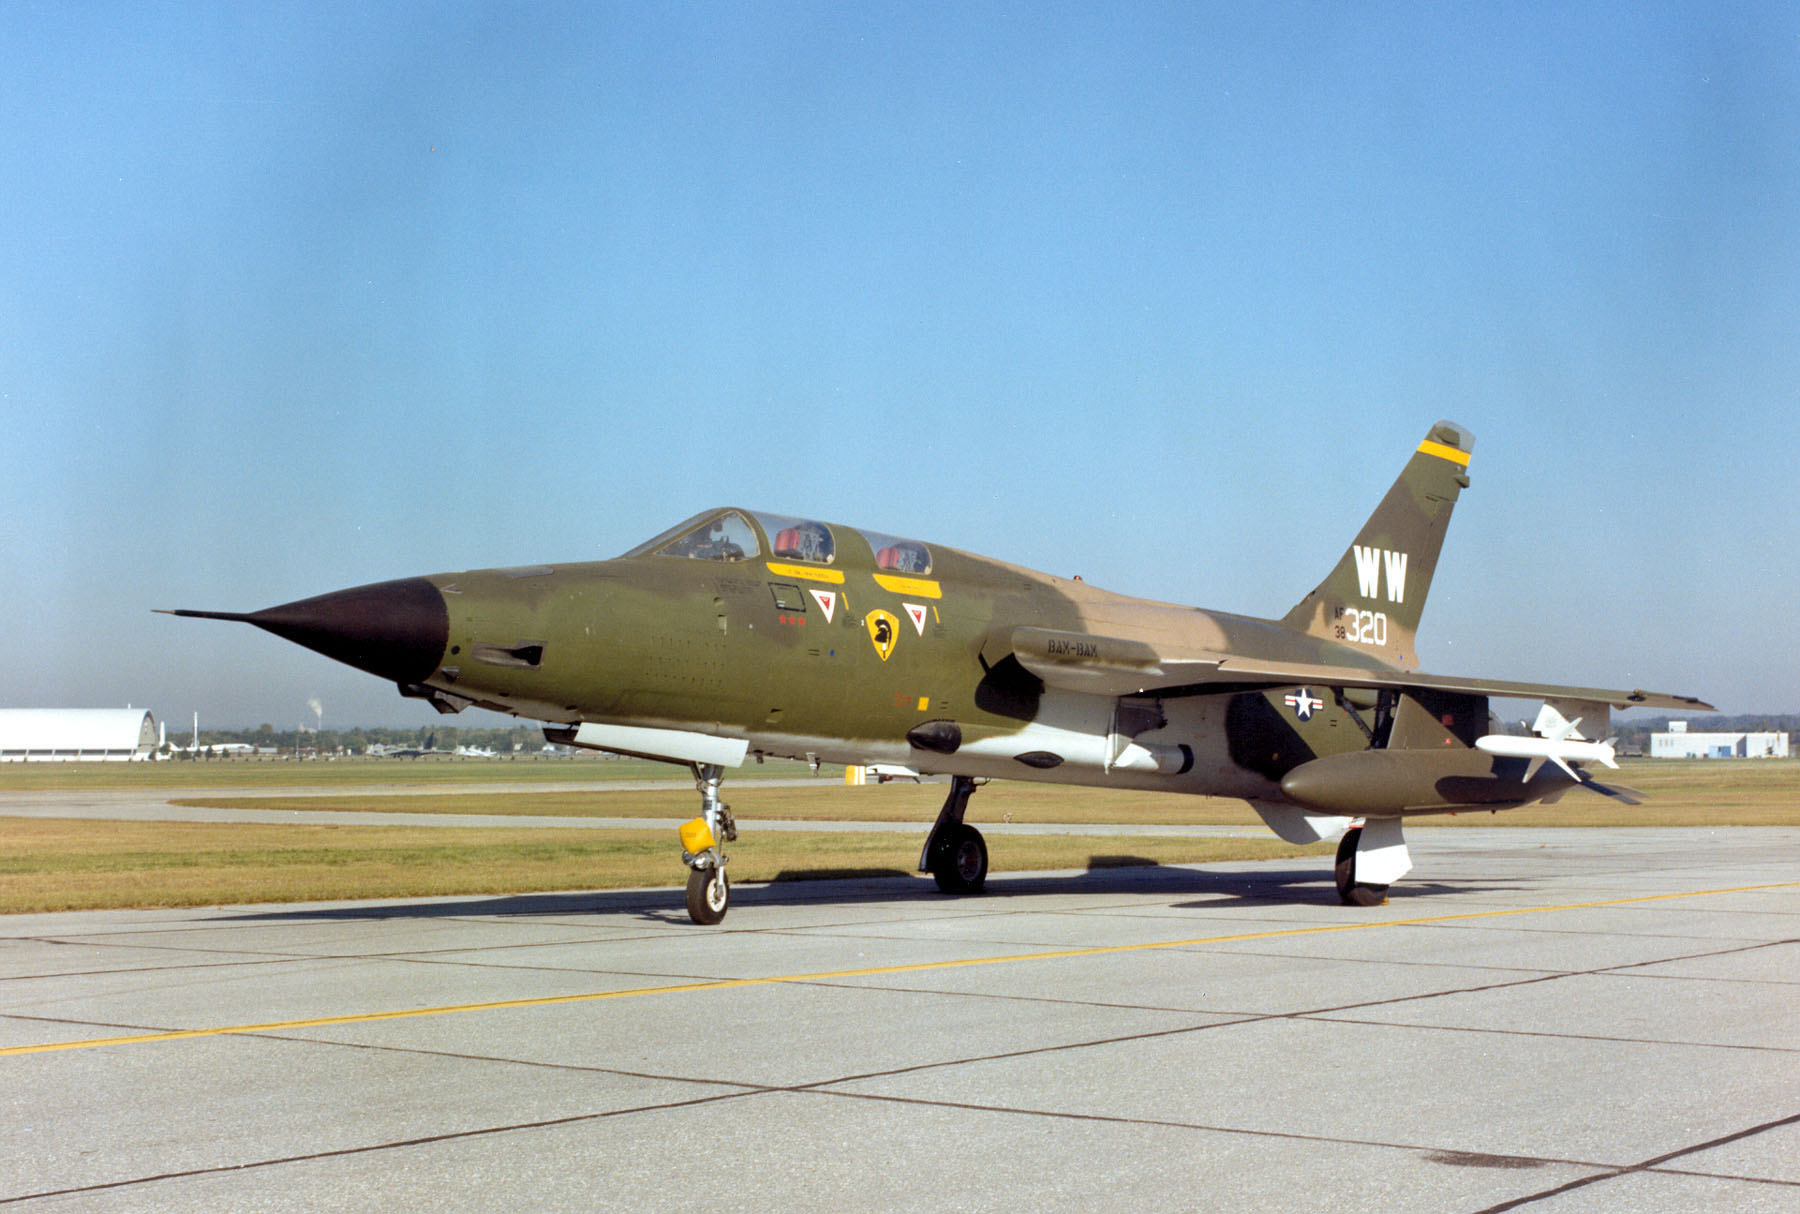 Republic F-105F-1-RE Thunderchief (converted to F-105G Wild Weasel III) 63-8320 at the National Museum of the United States Air Force, Wright-Patterson AFB. (U.S. Air Force)